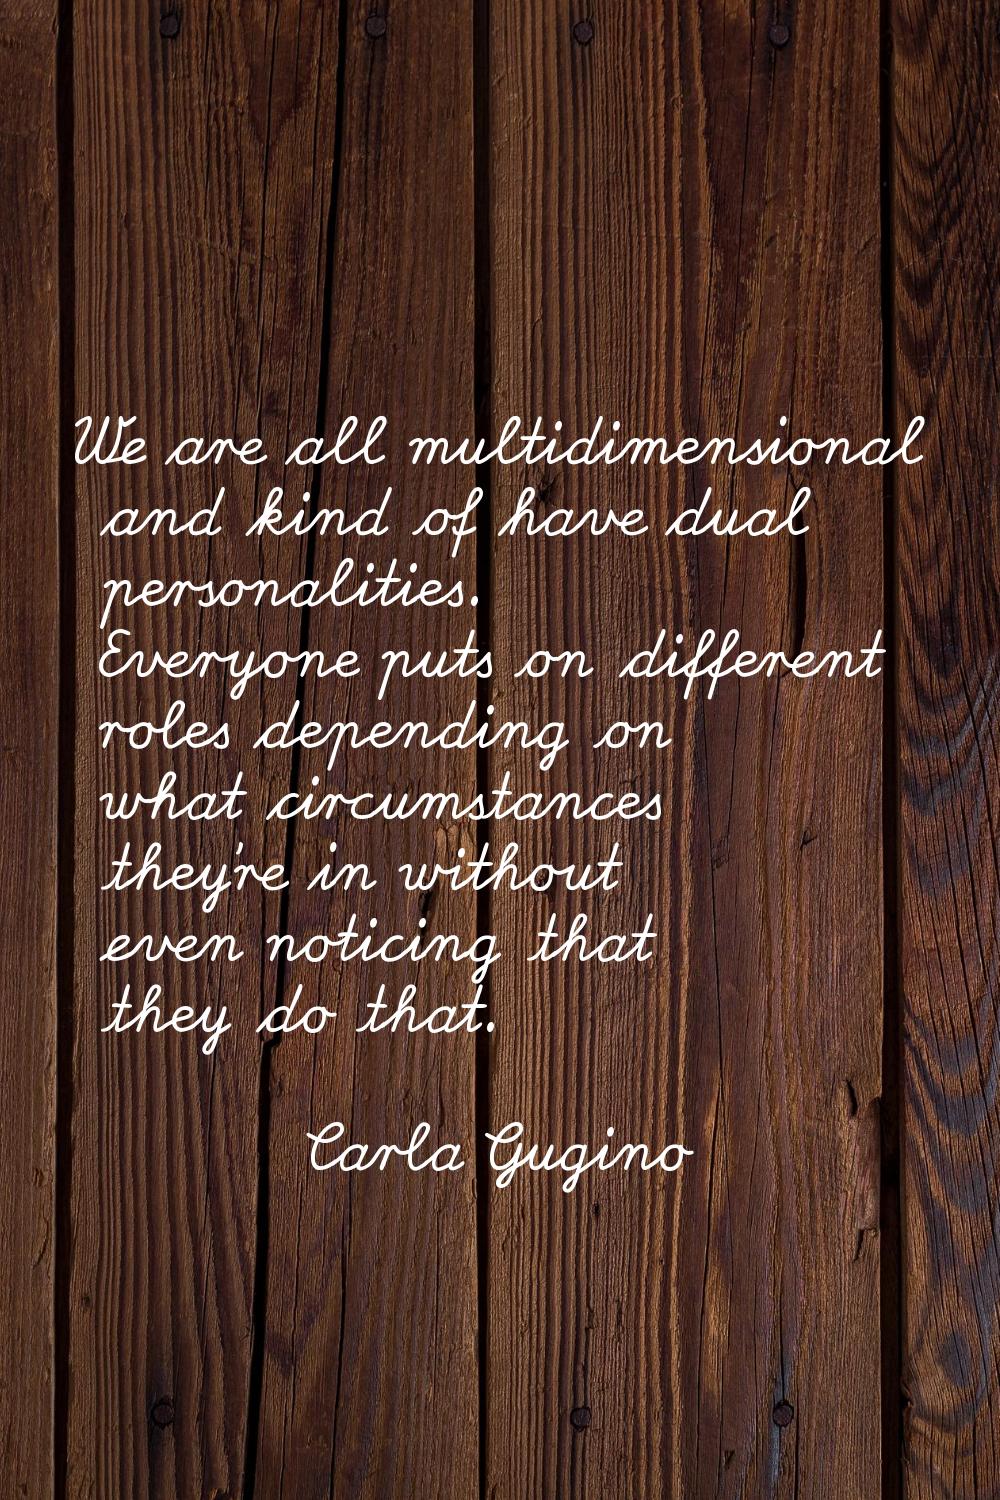 We are all multidimensional and kind of have dual personalities. Everyone puts on different roles d